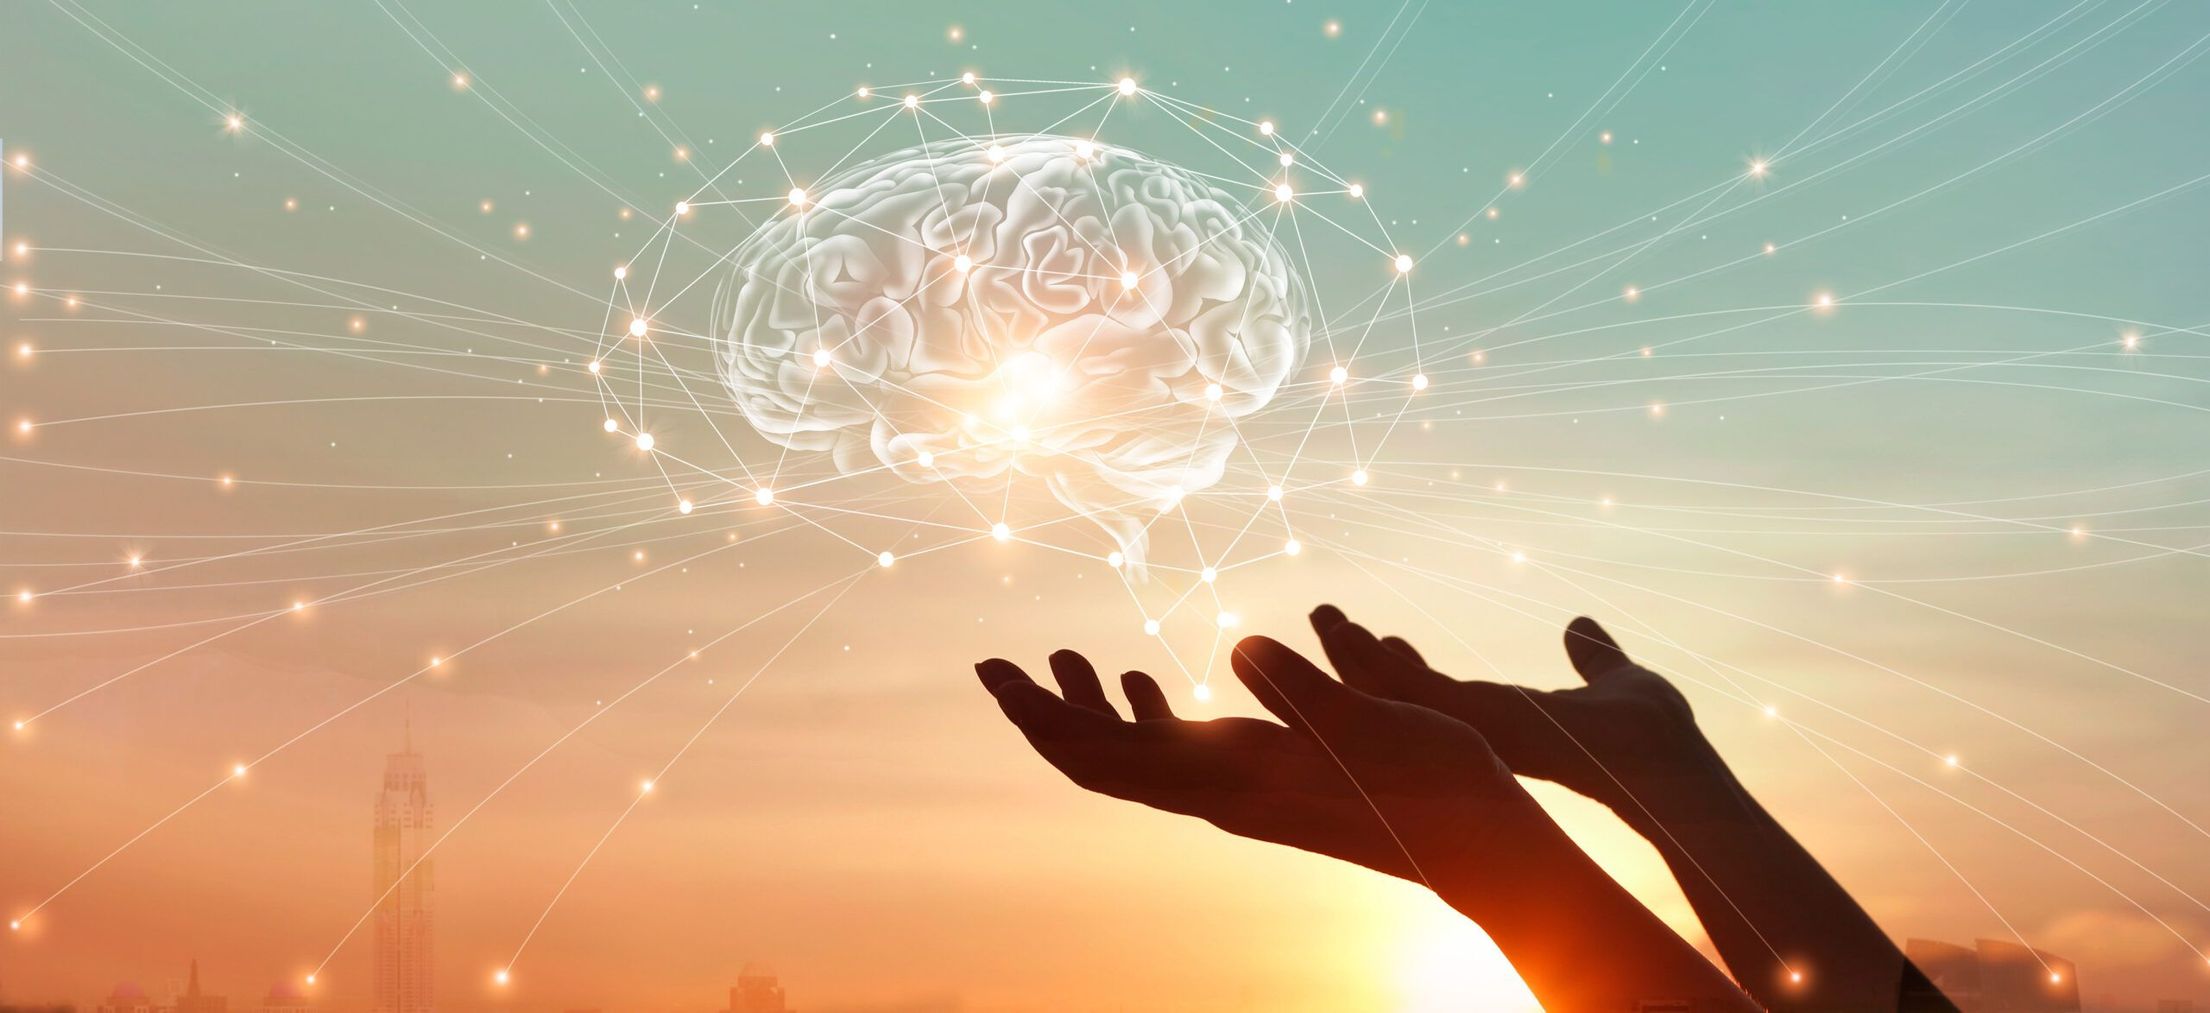 a person is holding a brain in their hands at sunset .